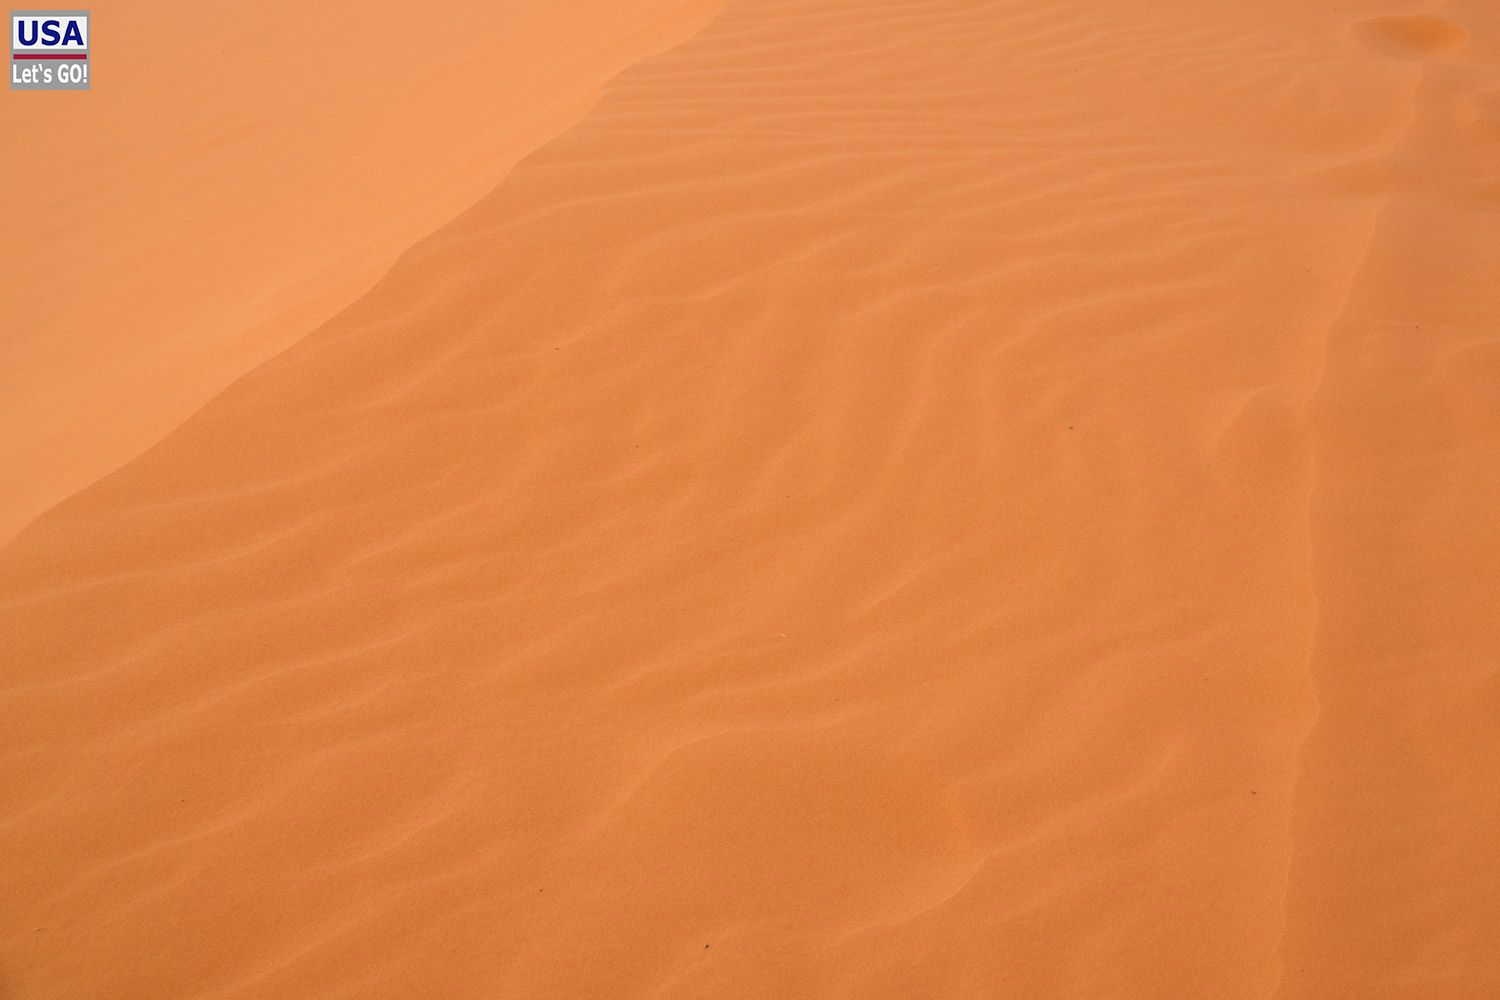 Coral Pink Sand Dunes